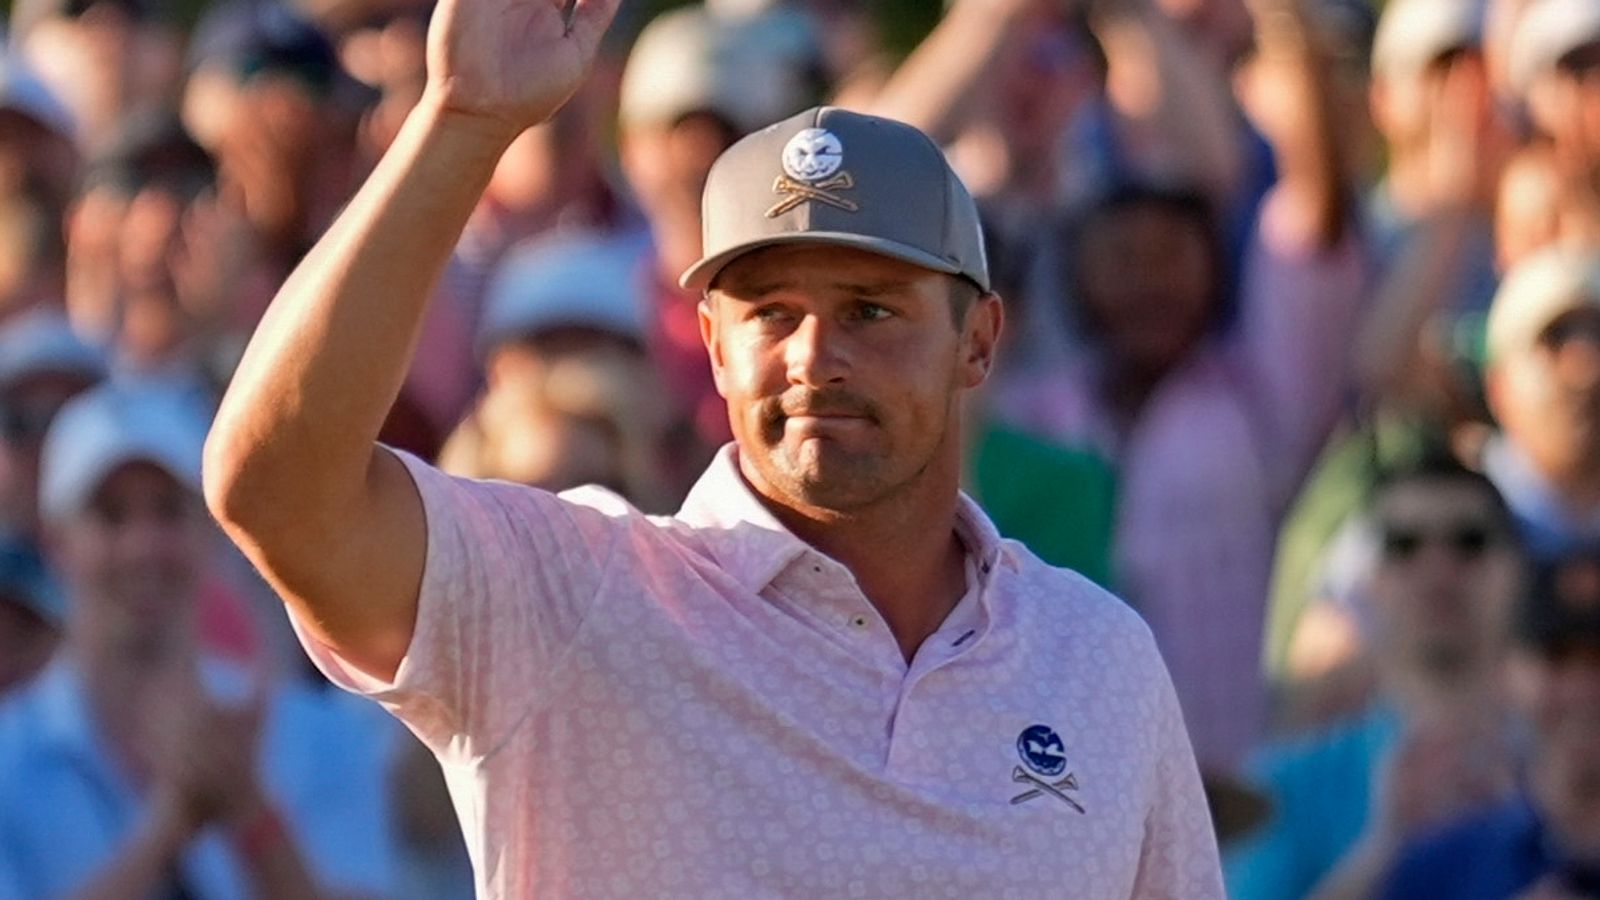 Dramatic Finish for Bryson DeChambeau at The Masters Leaves Competitor Scottie Scheffler in Awe